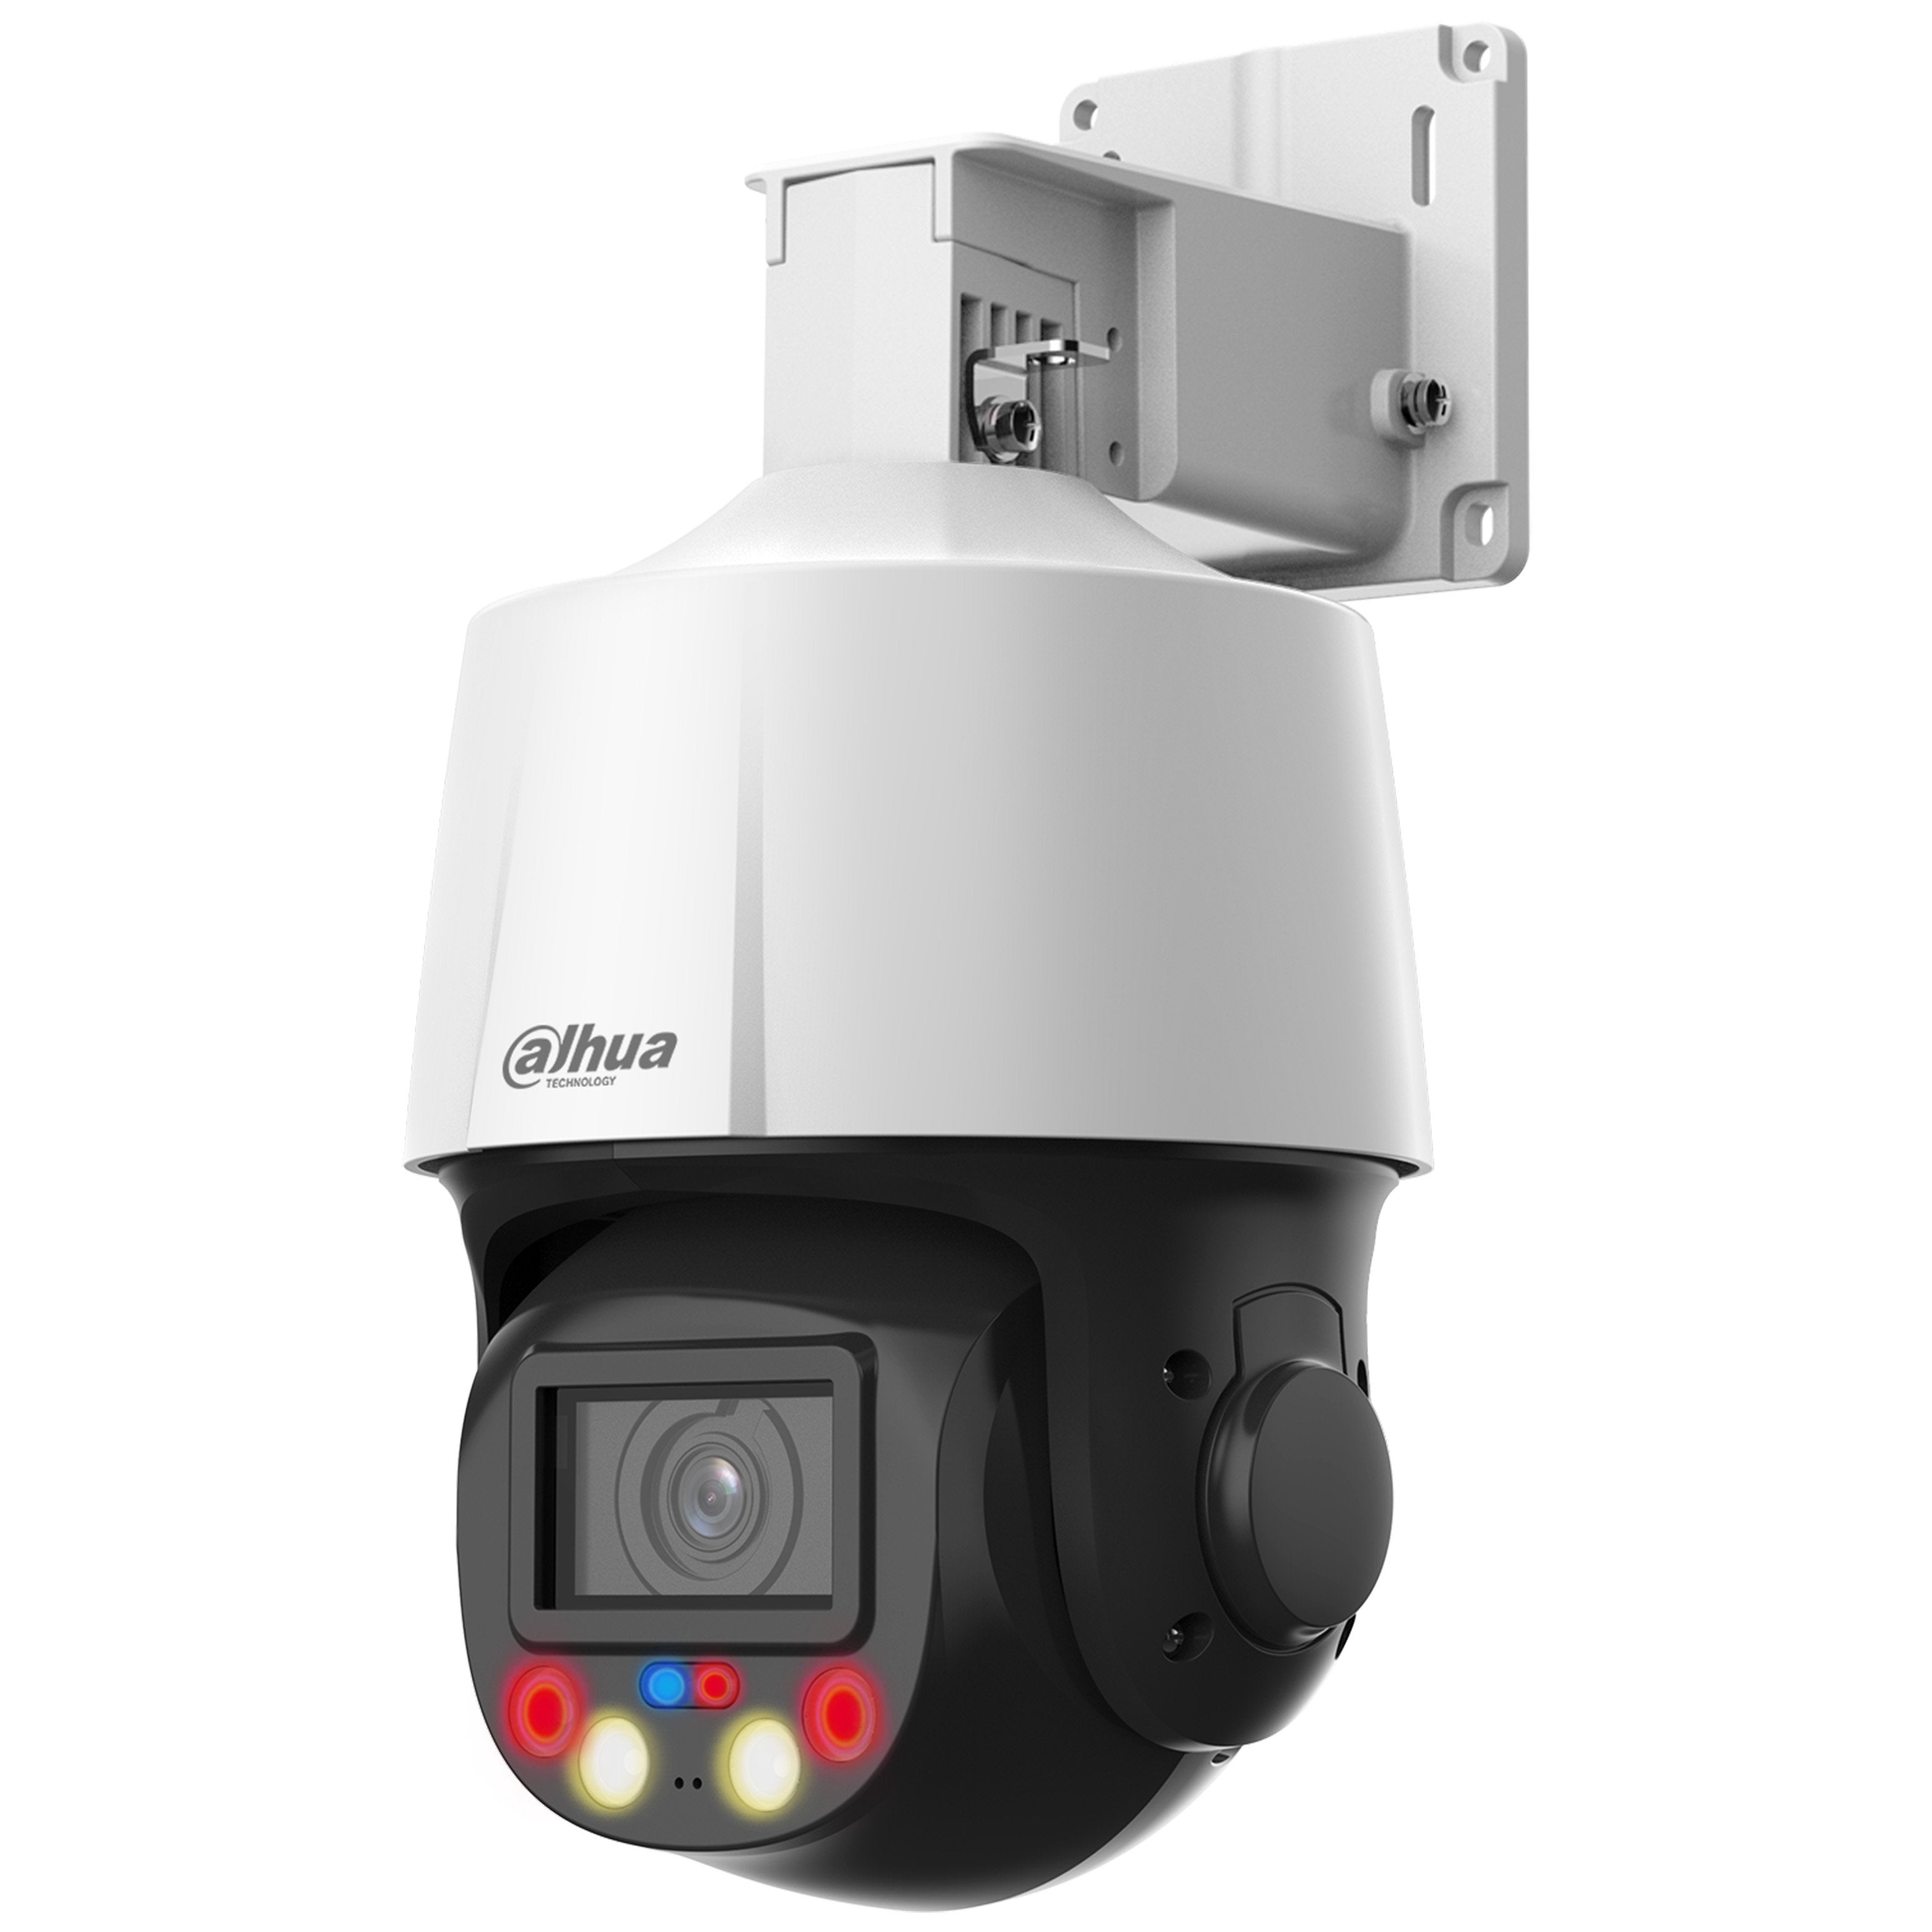 **NEW** Dahua 4MP IP WizSense AI Series Full Colour Active Deterrence TiOC IR 5x PTZ, SMD 3.0, Perimeter, Face Detection, Auto-Tracking, 2.7-13.5mm, 120dB WDR, 50m IR / 30m White Light, POE / 12VDC, IP66, MicroSD, Built-in Mic / Speaker, Red / Blue Lights